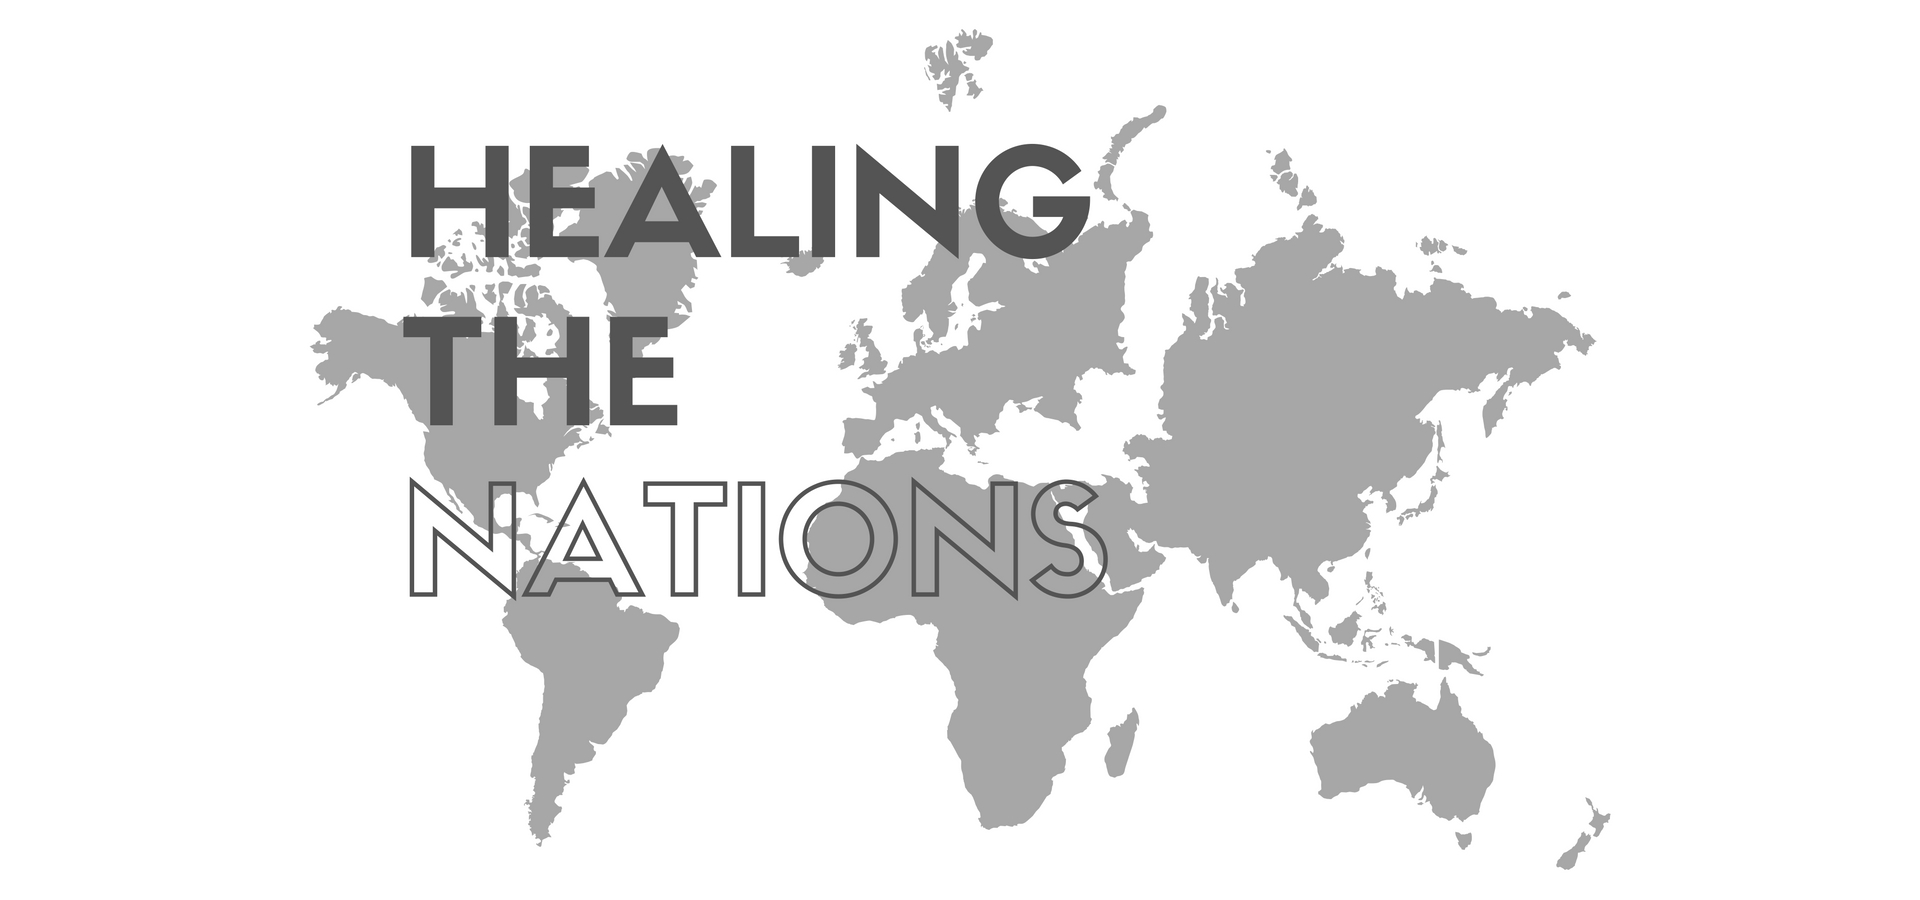 Healing the Nations